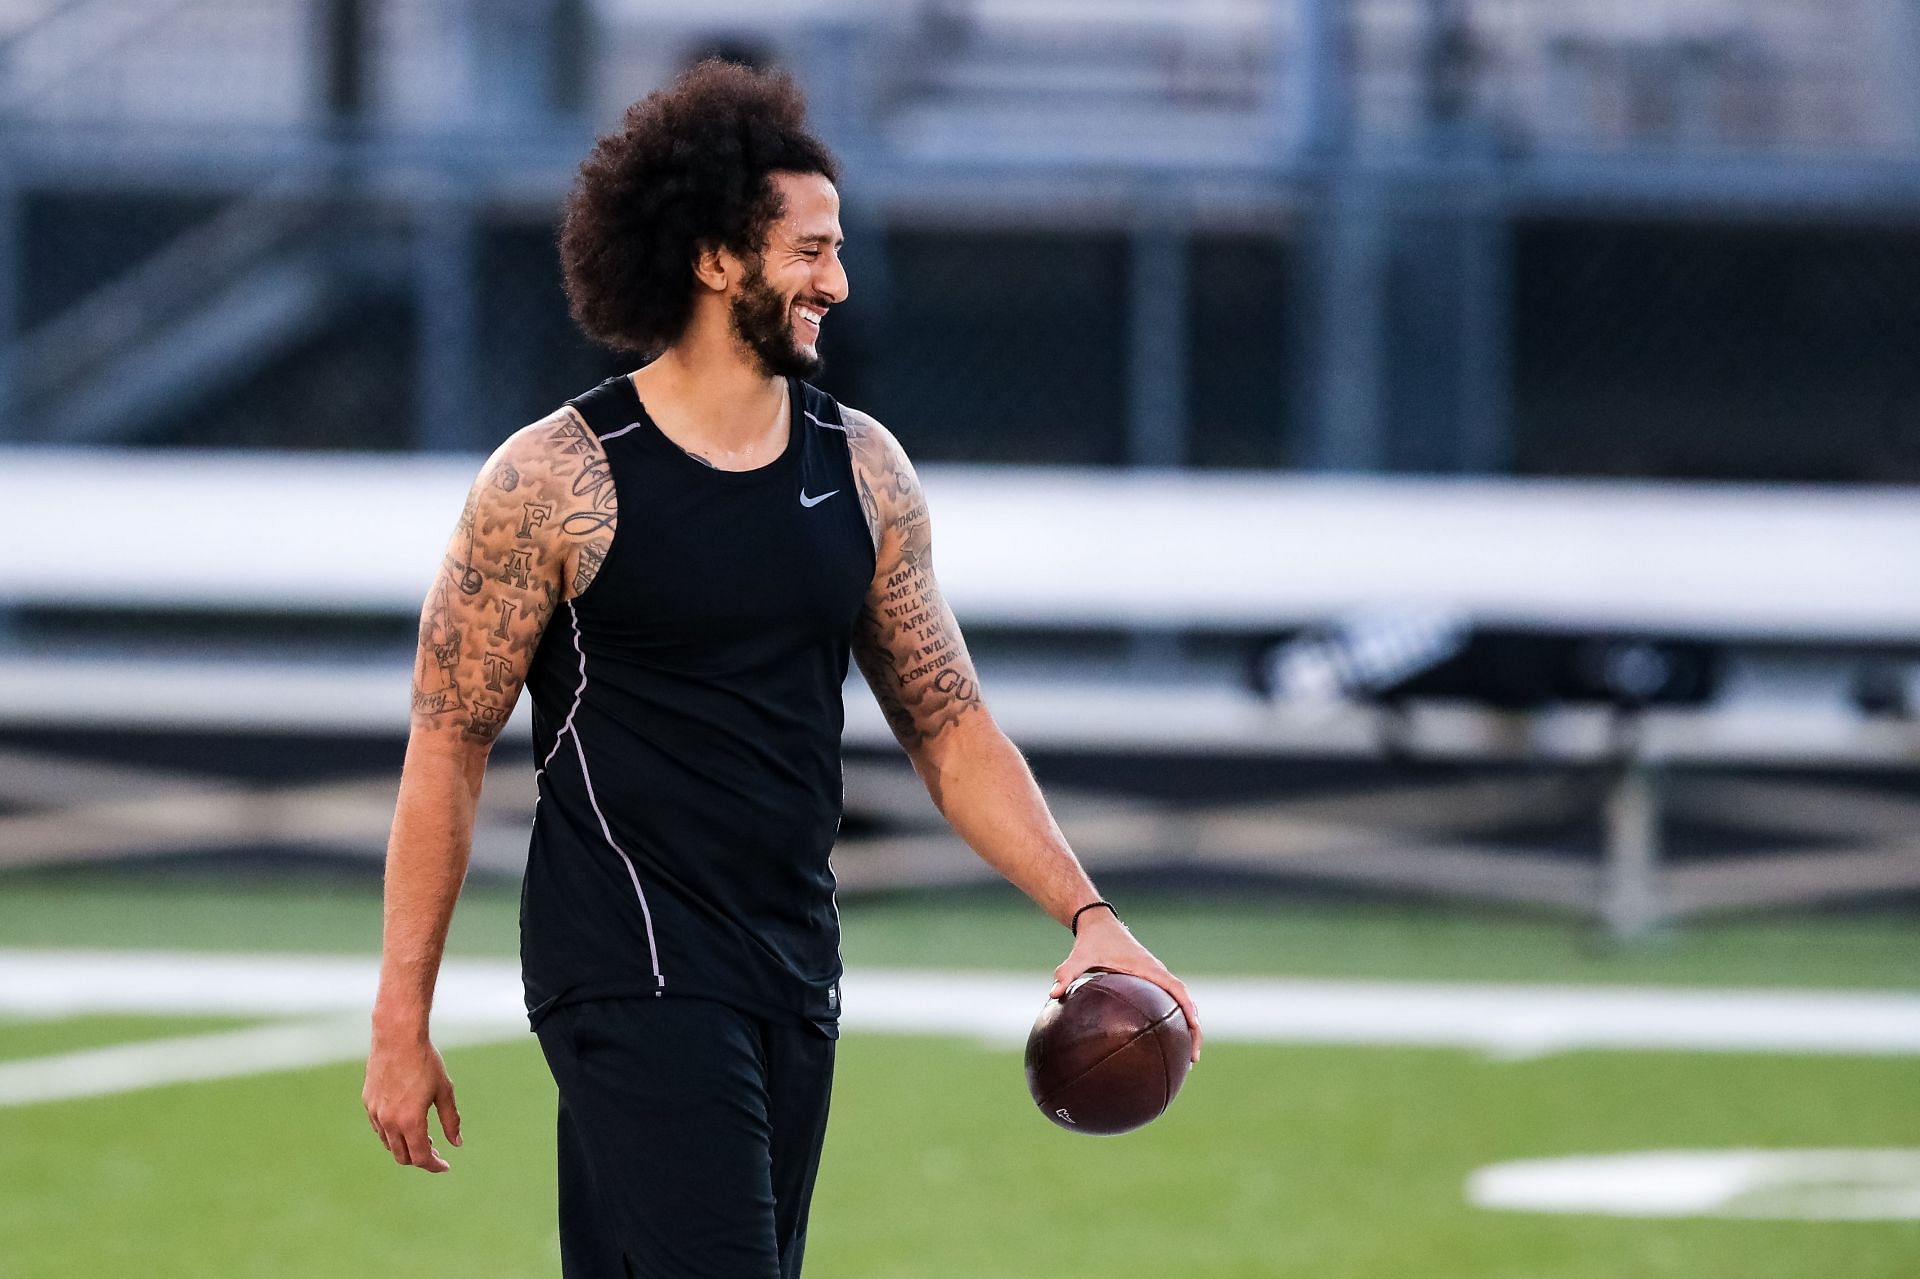 Colin Kaepernick readies himself for his NFL Workout